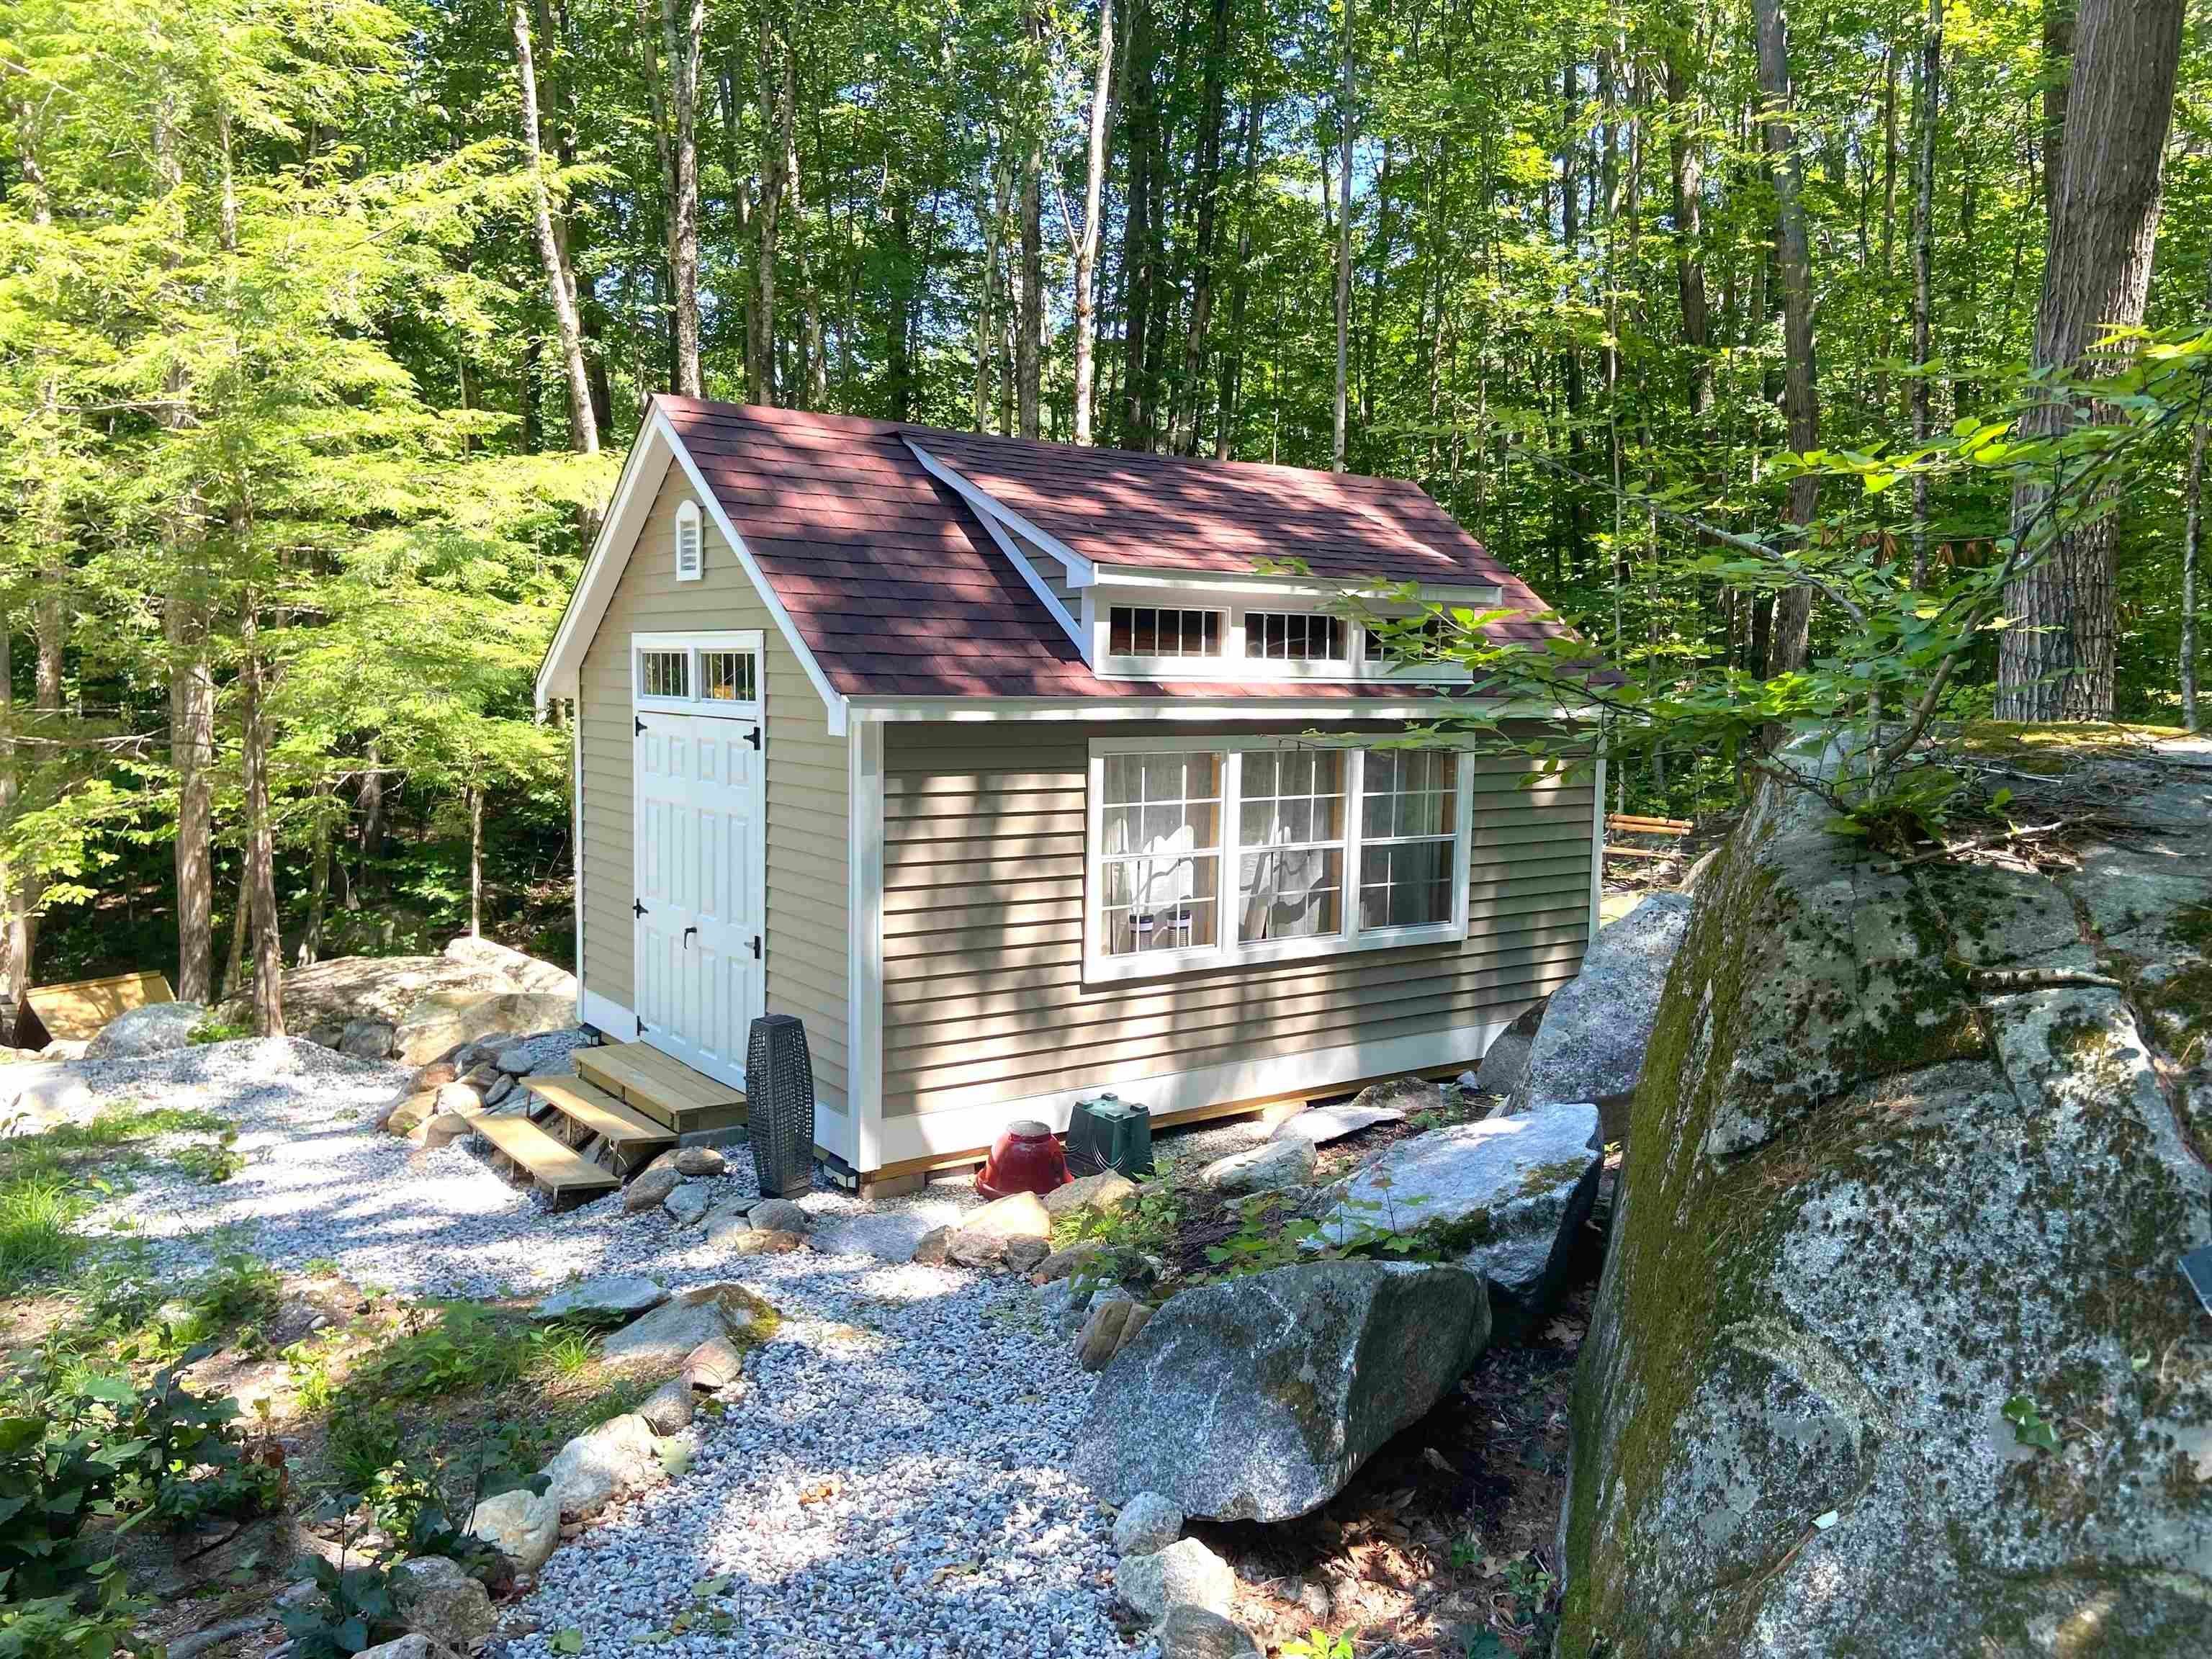 Property for Sale at Center Harbor, NH 03226